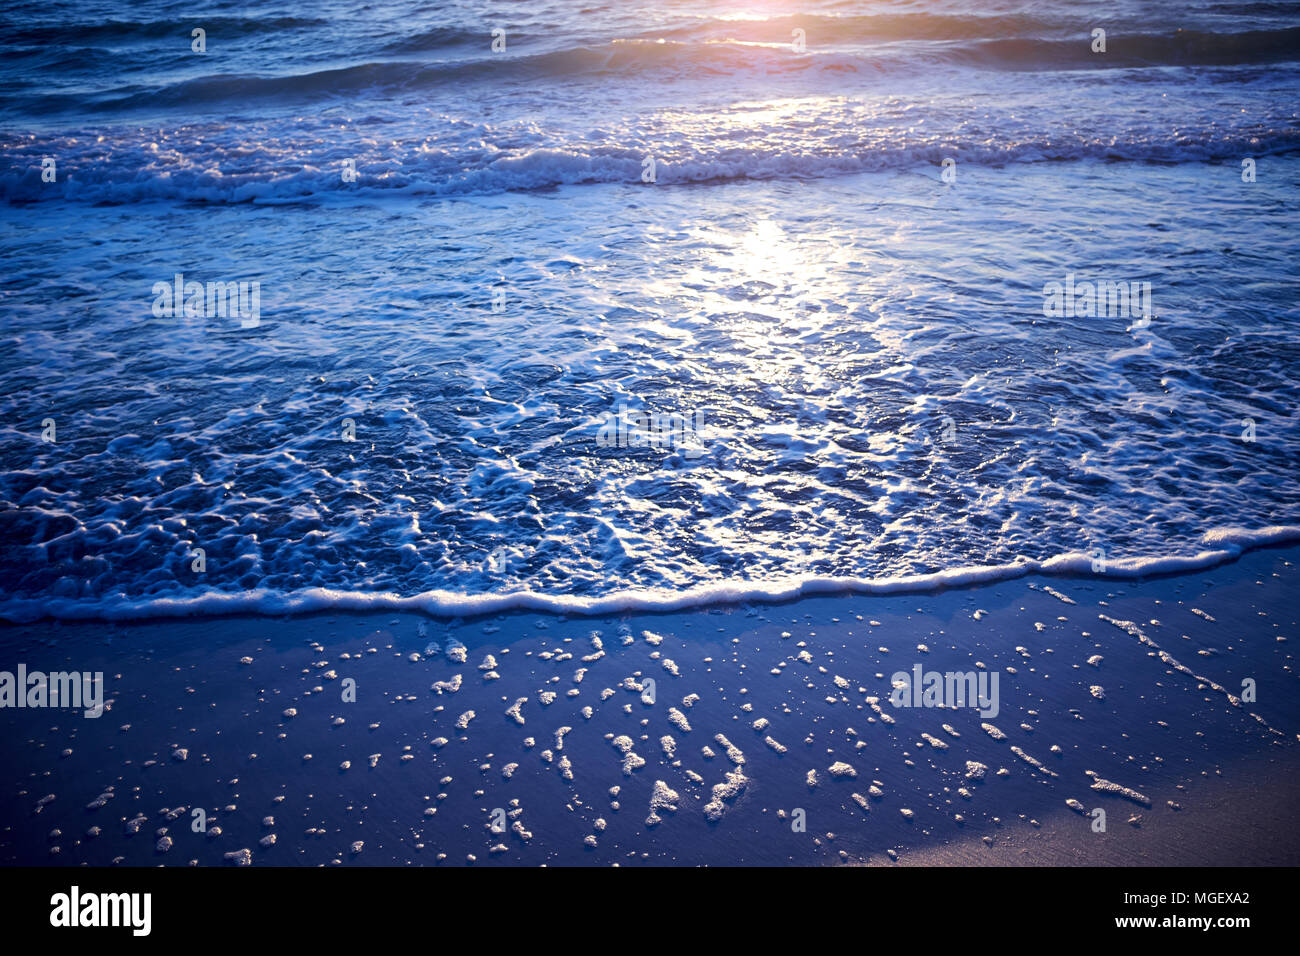 Glowing sunset at blue hour on Anna Maria Island, Florida with a low angle view of gentle surf lapping the beach and reflection of the sun on the wate Stock Photo